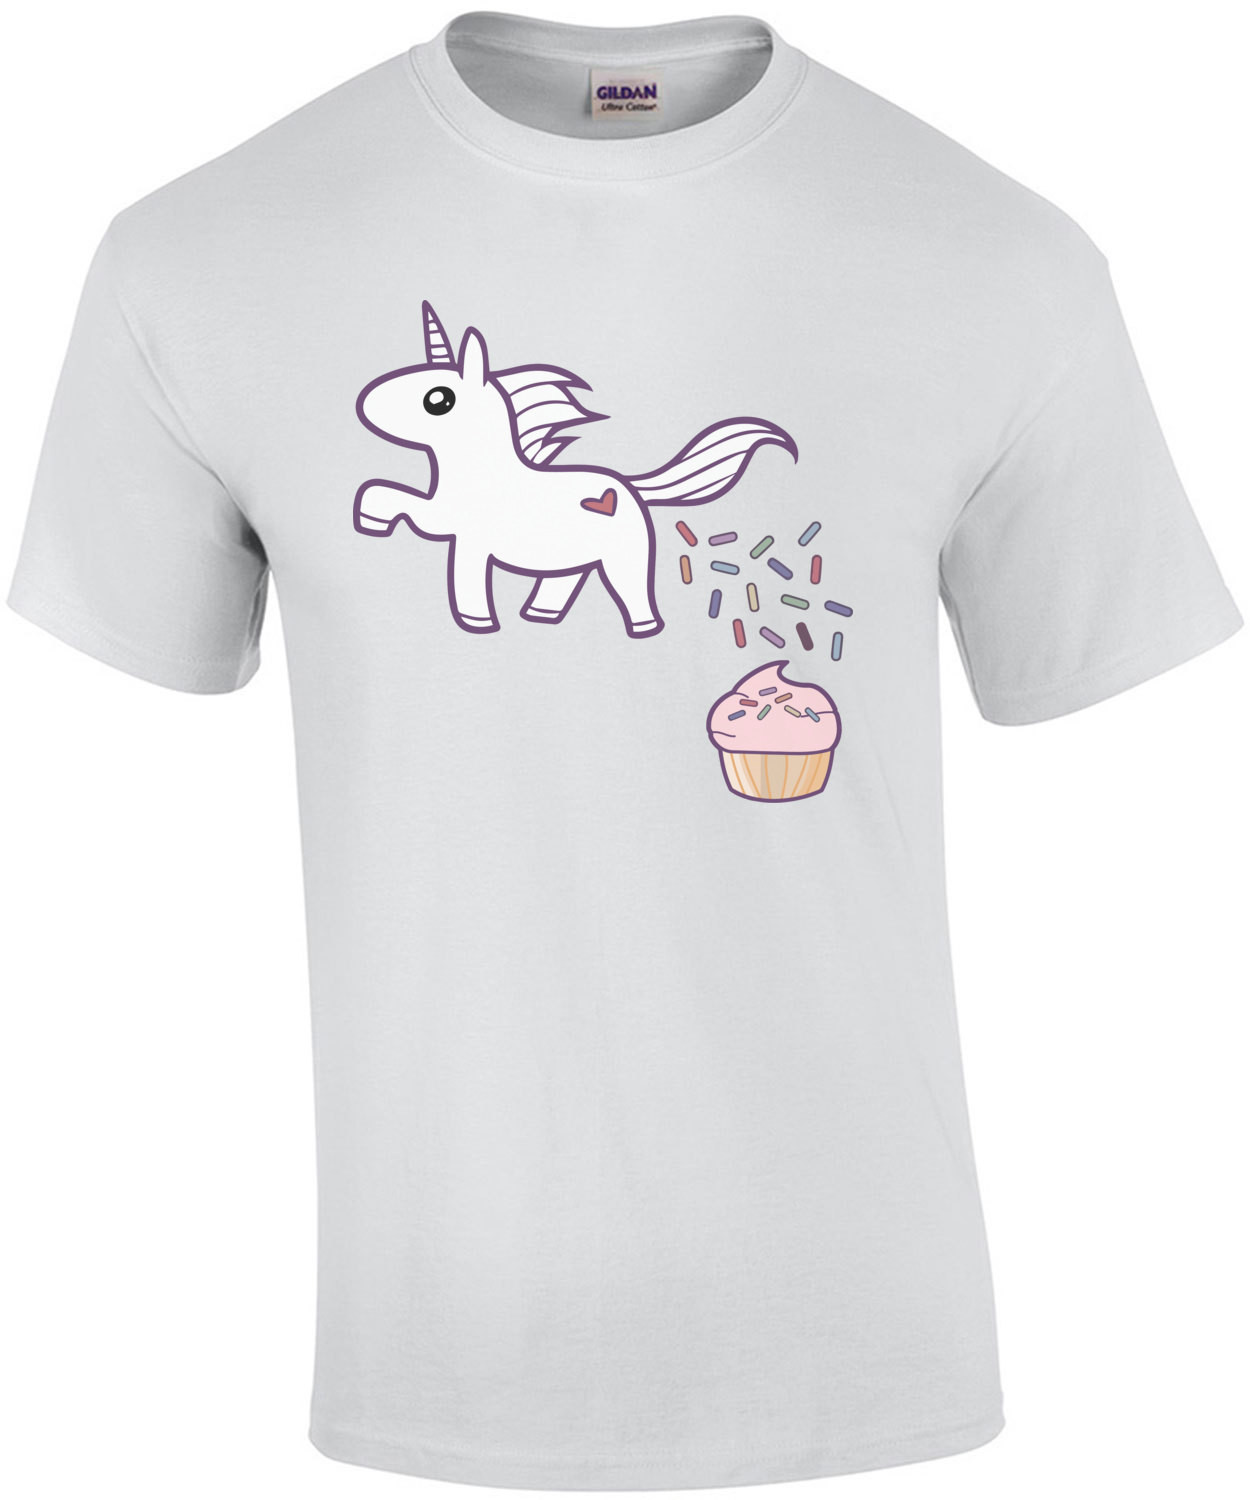 How sprinkles are made t-shirt